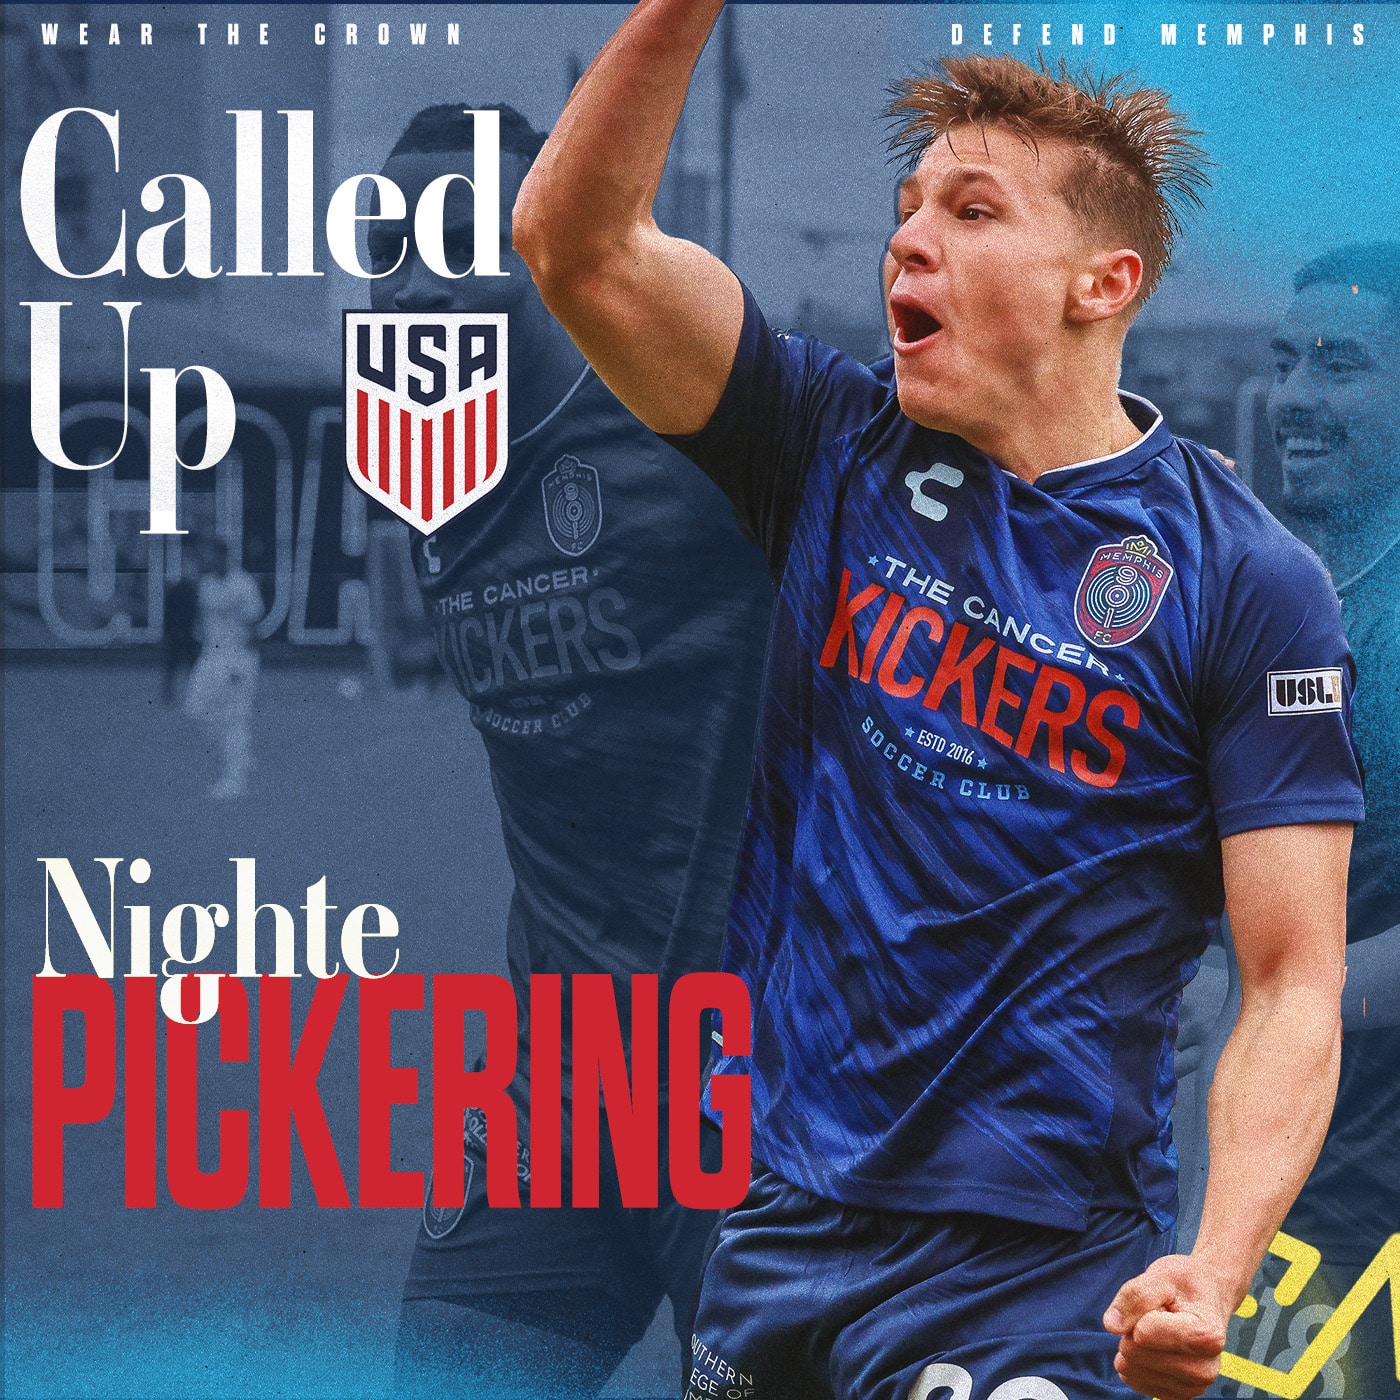 Featured image for “901 FC’s Nighte Pickering Called Up To US U19 National Team”